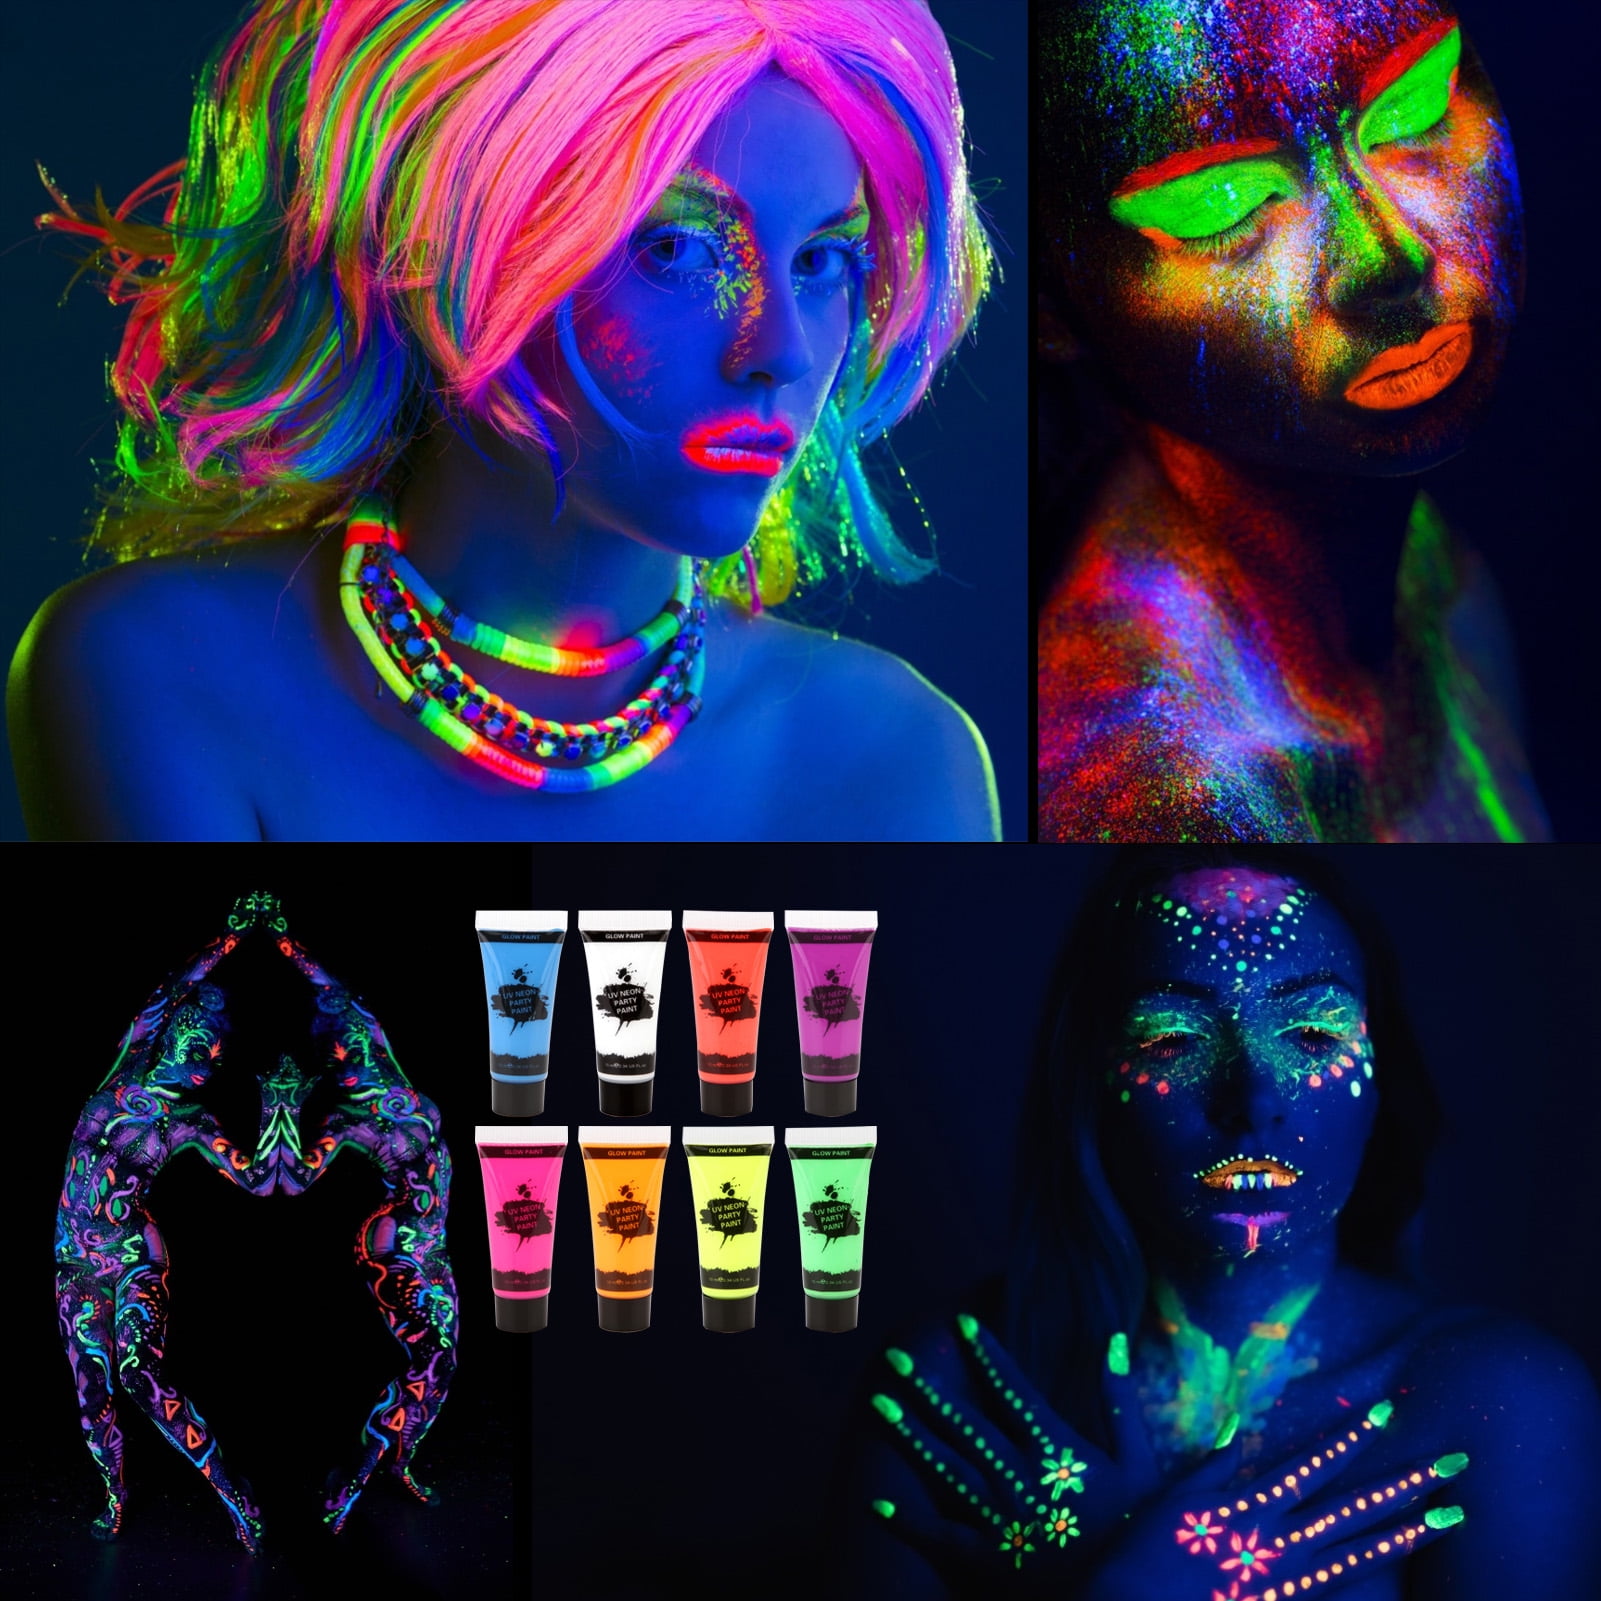  Itsfairypro Halloween Glow In The Dark Face Paint, Body Neon  Glow Party Supplies Accessories,12 Pcs UV Blacklight Glow Water-Reactive Body  Painting Kit For Festival Kids Gift Rave Carnival : Arts, Crafts